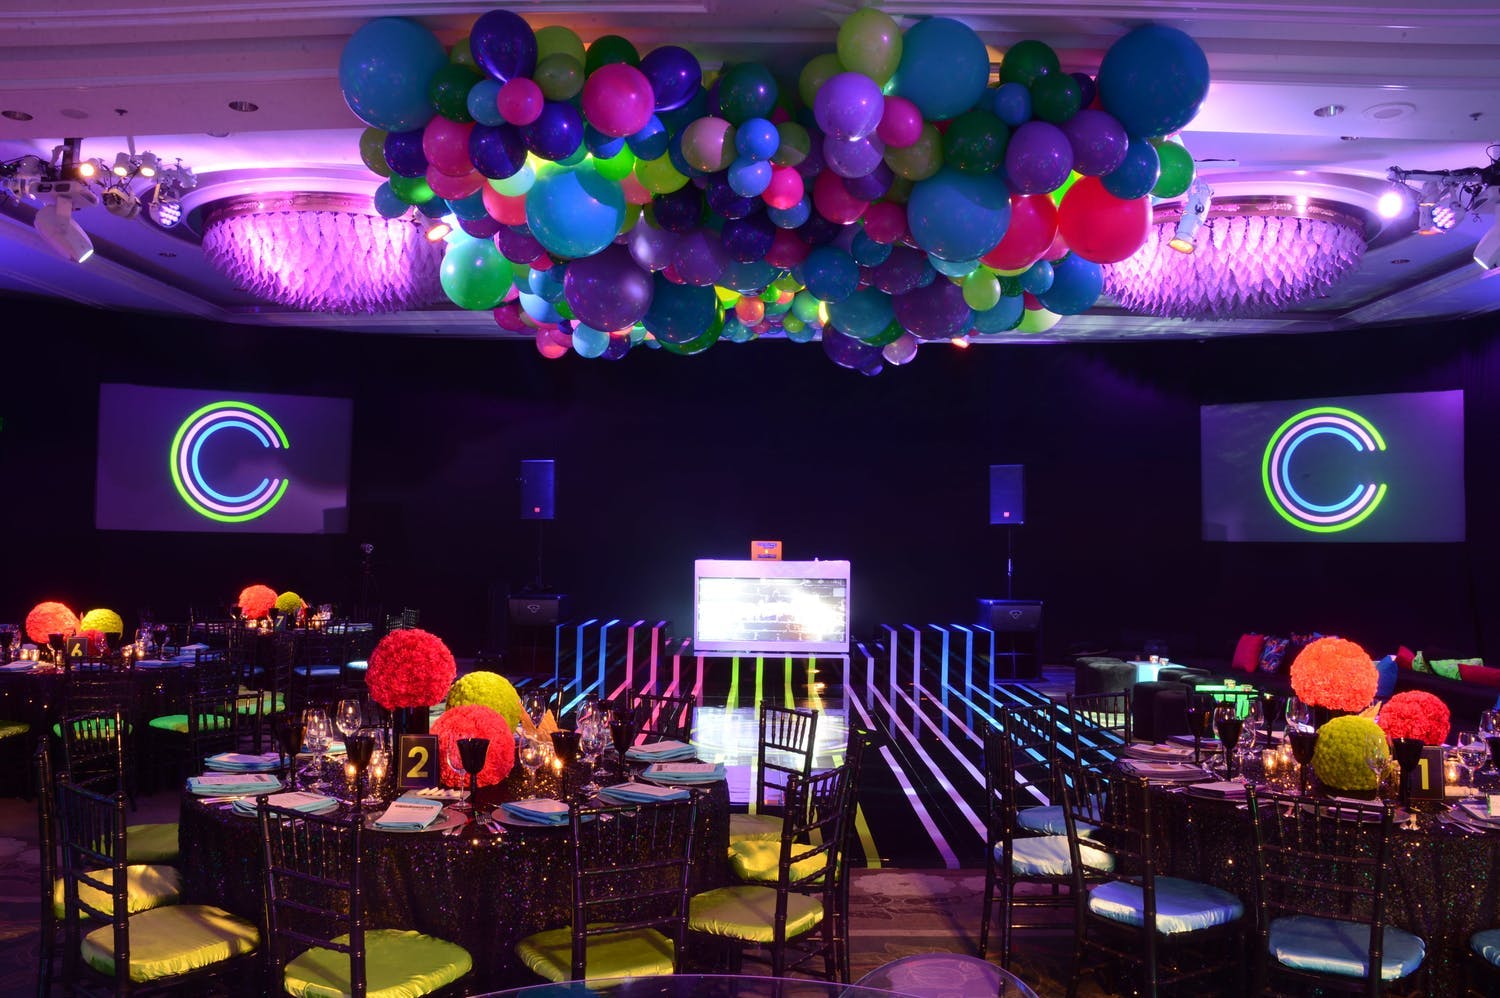 Neon Bar Mitzvah Party with Striped Neon Dance Floor and Colorful Ceiling Balloon Décor | PartySlate